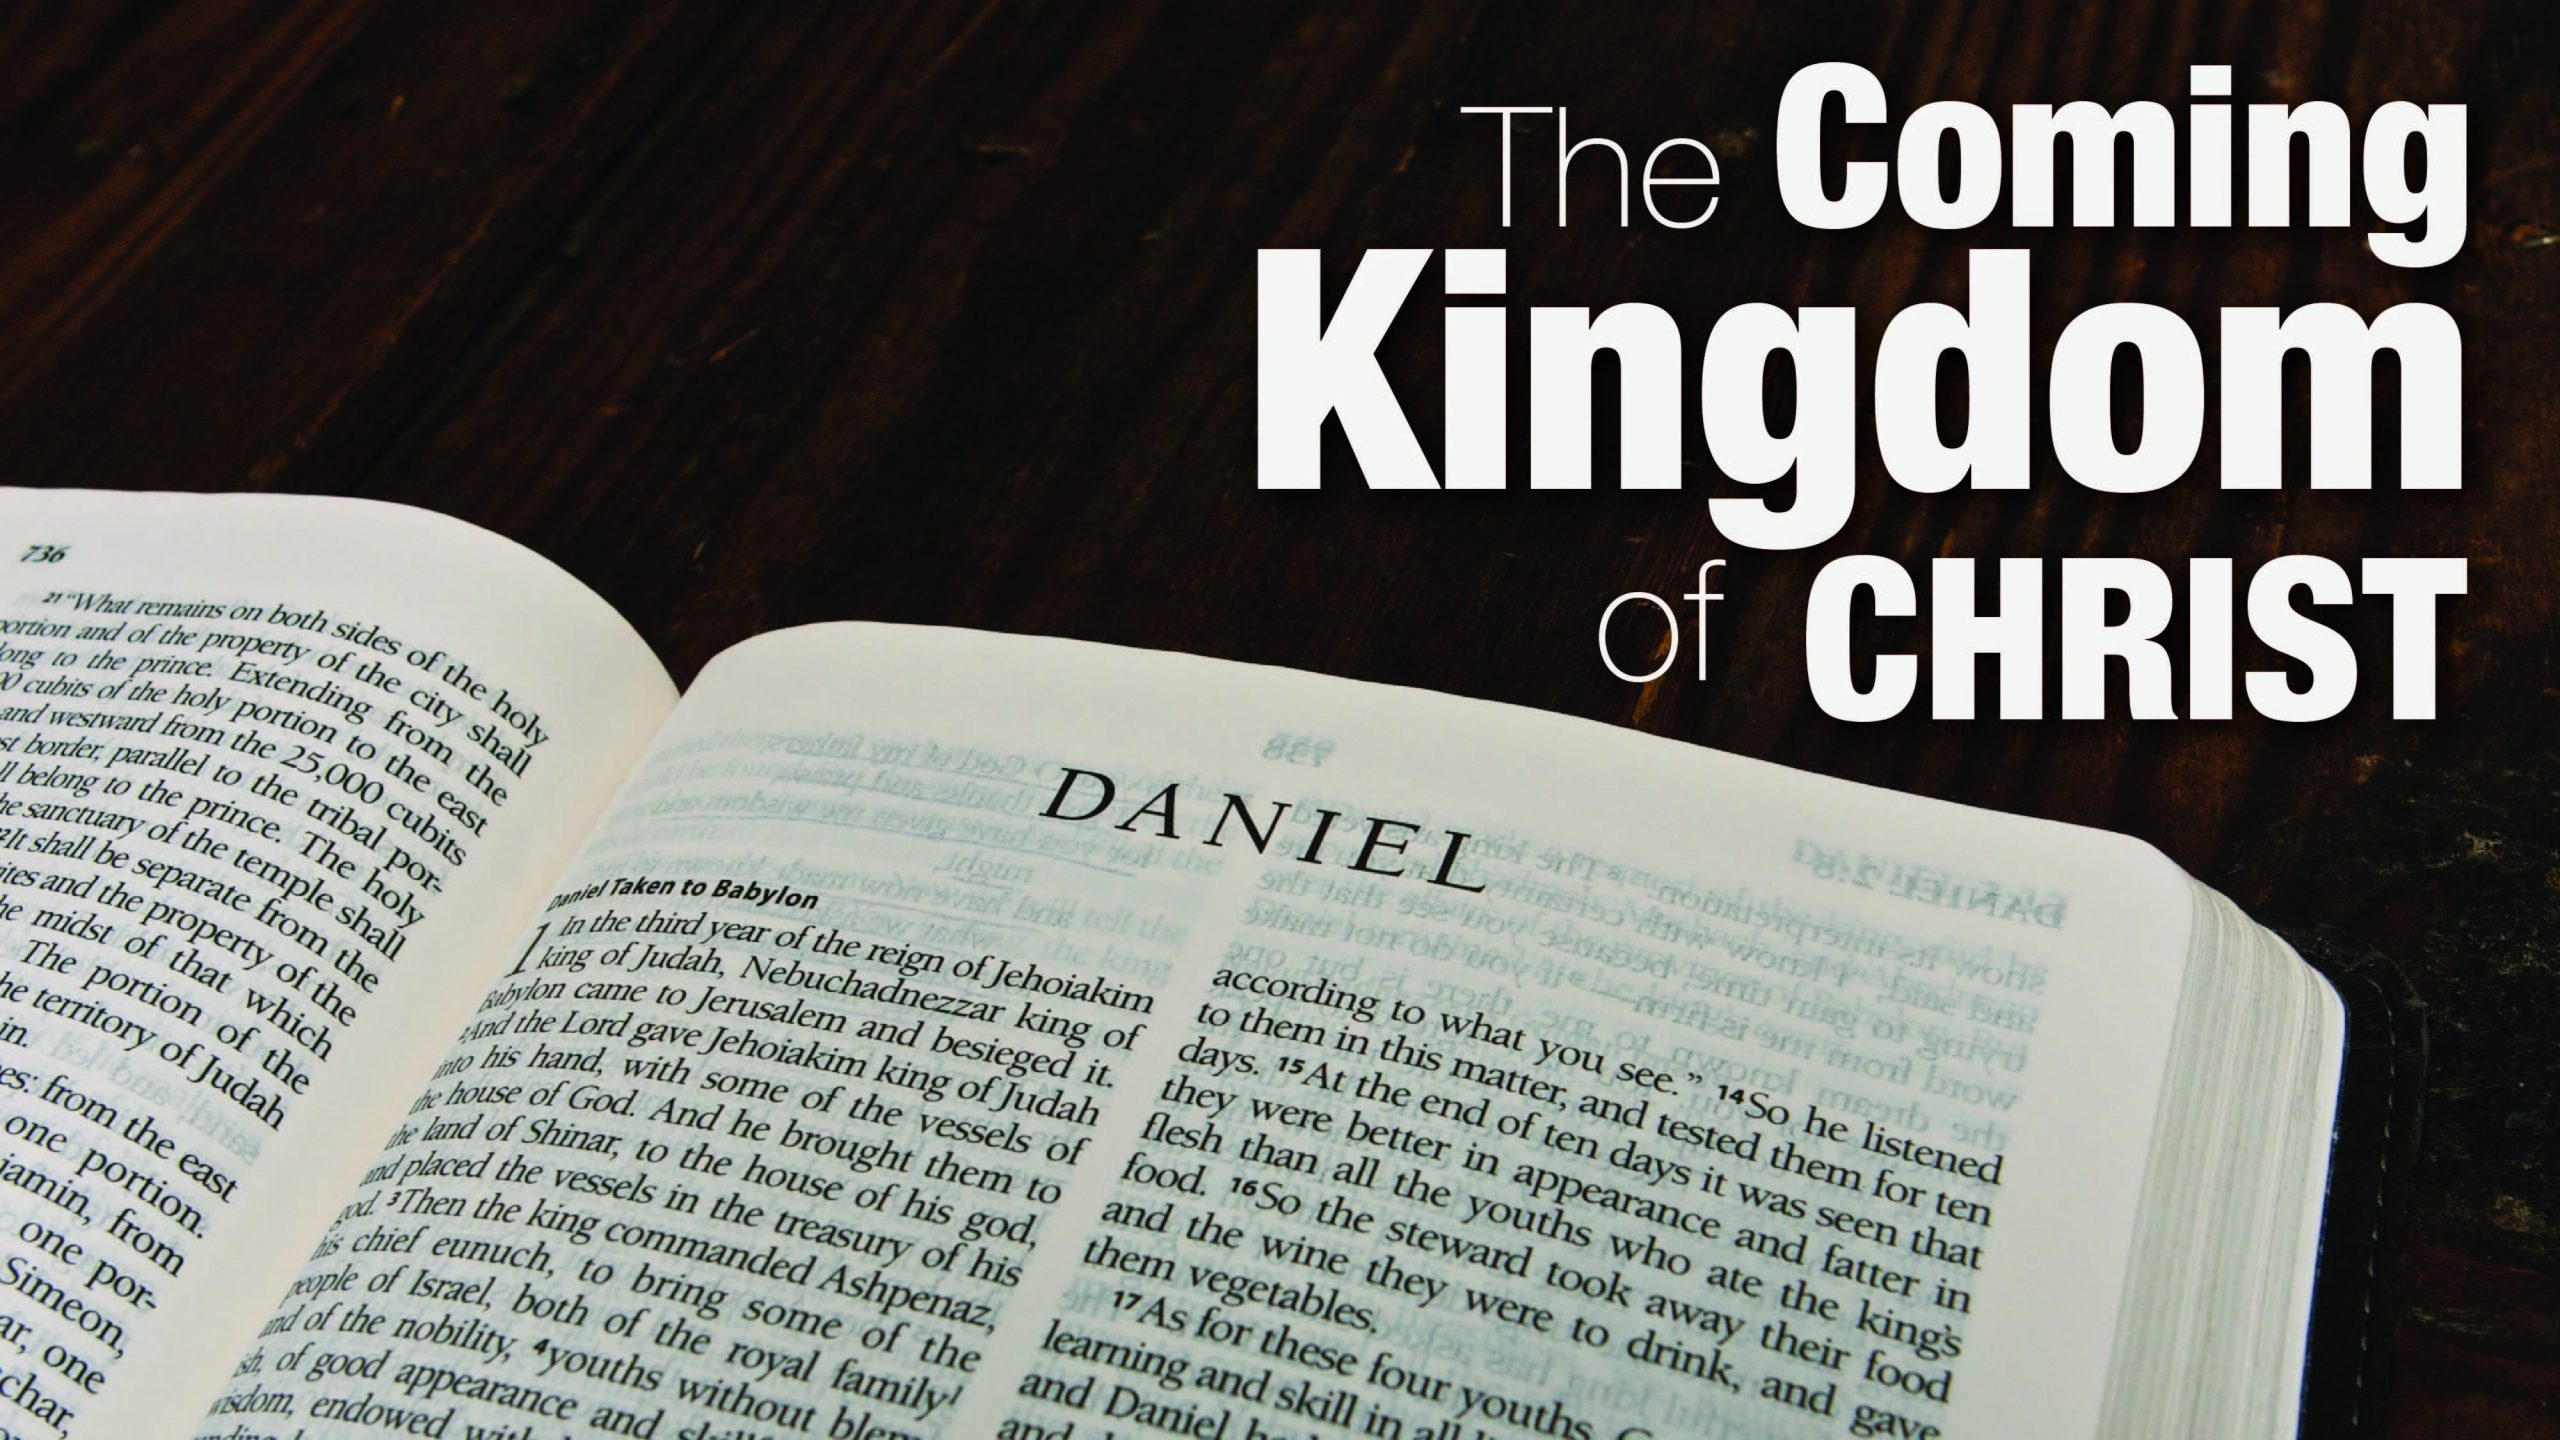 The Coming Kingdom of Christ